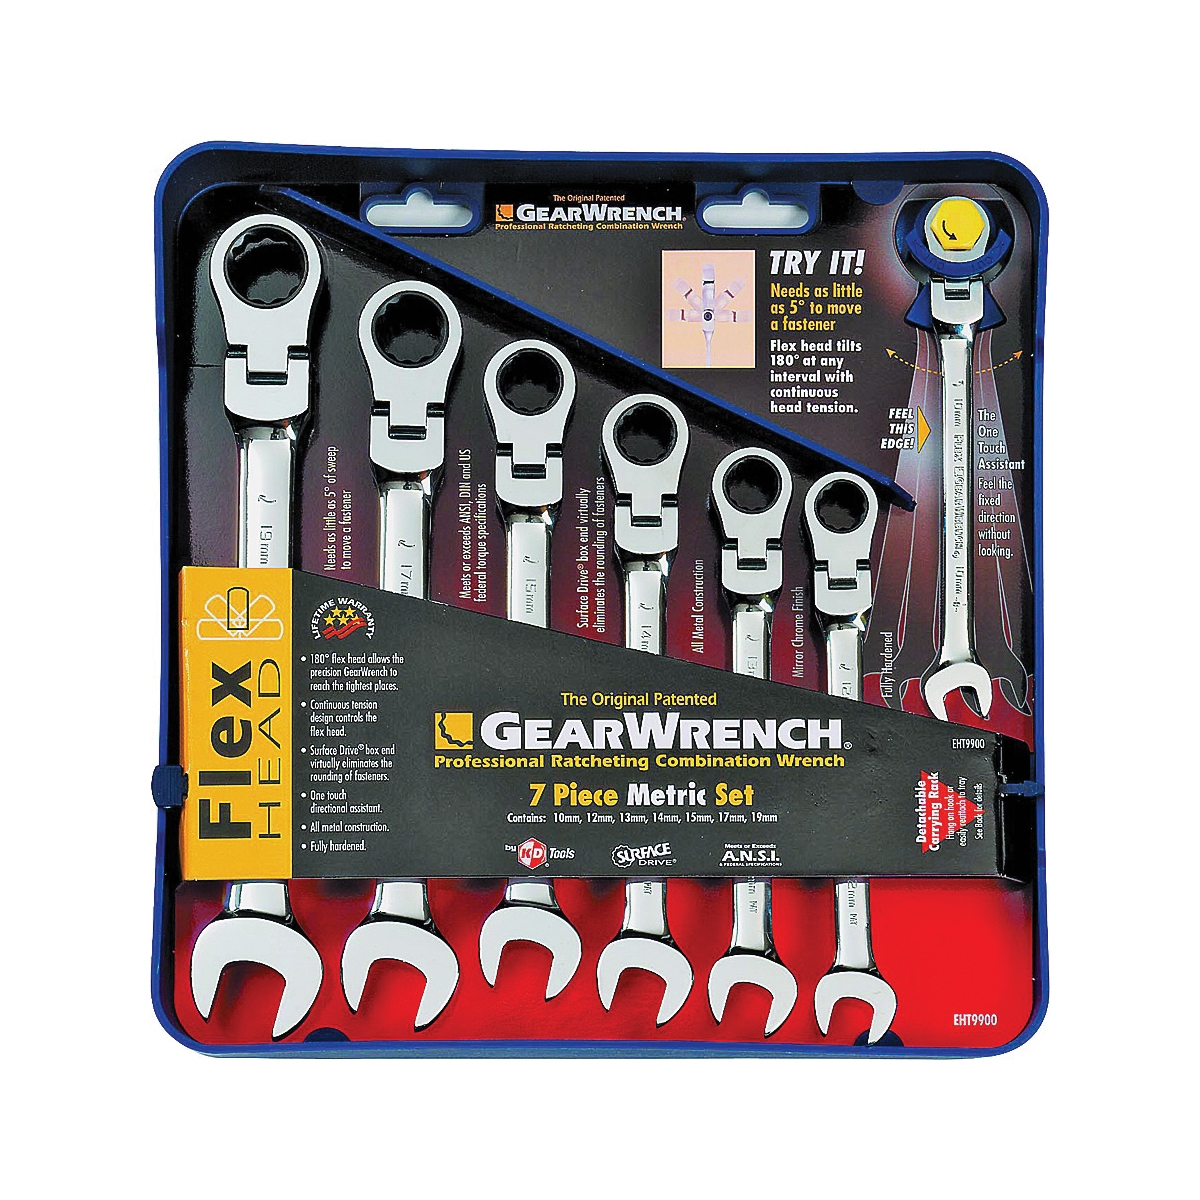 Gearwrench 9900D